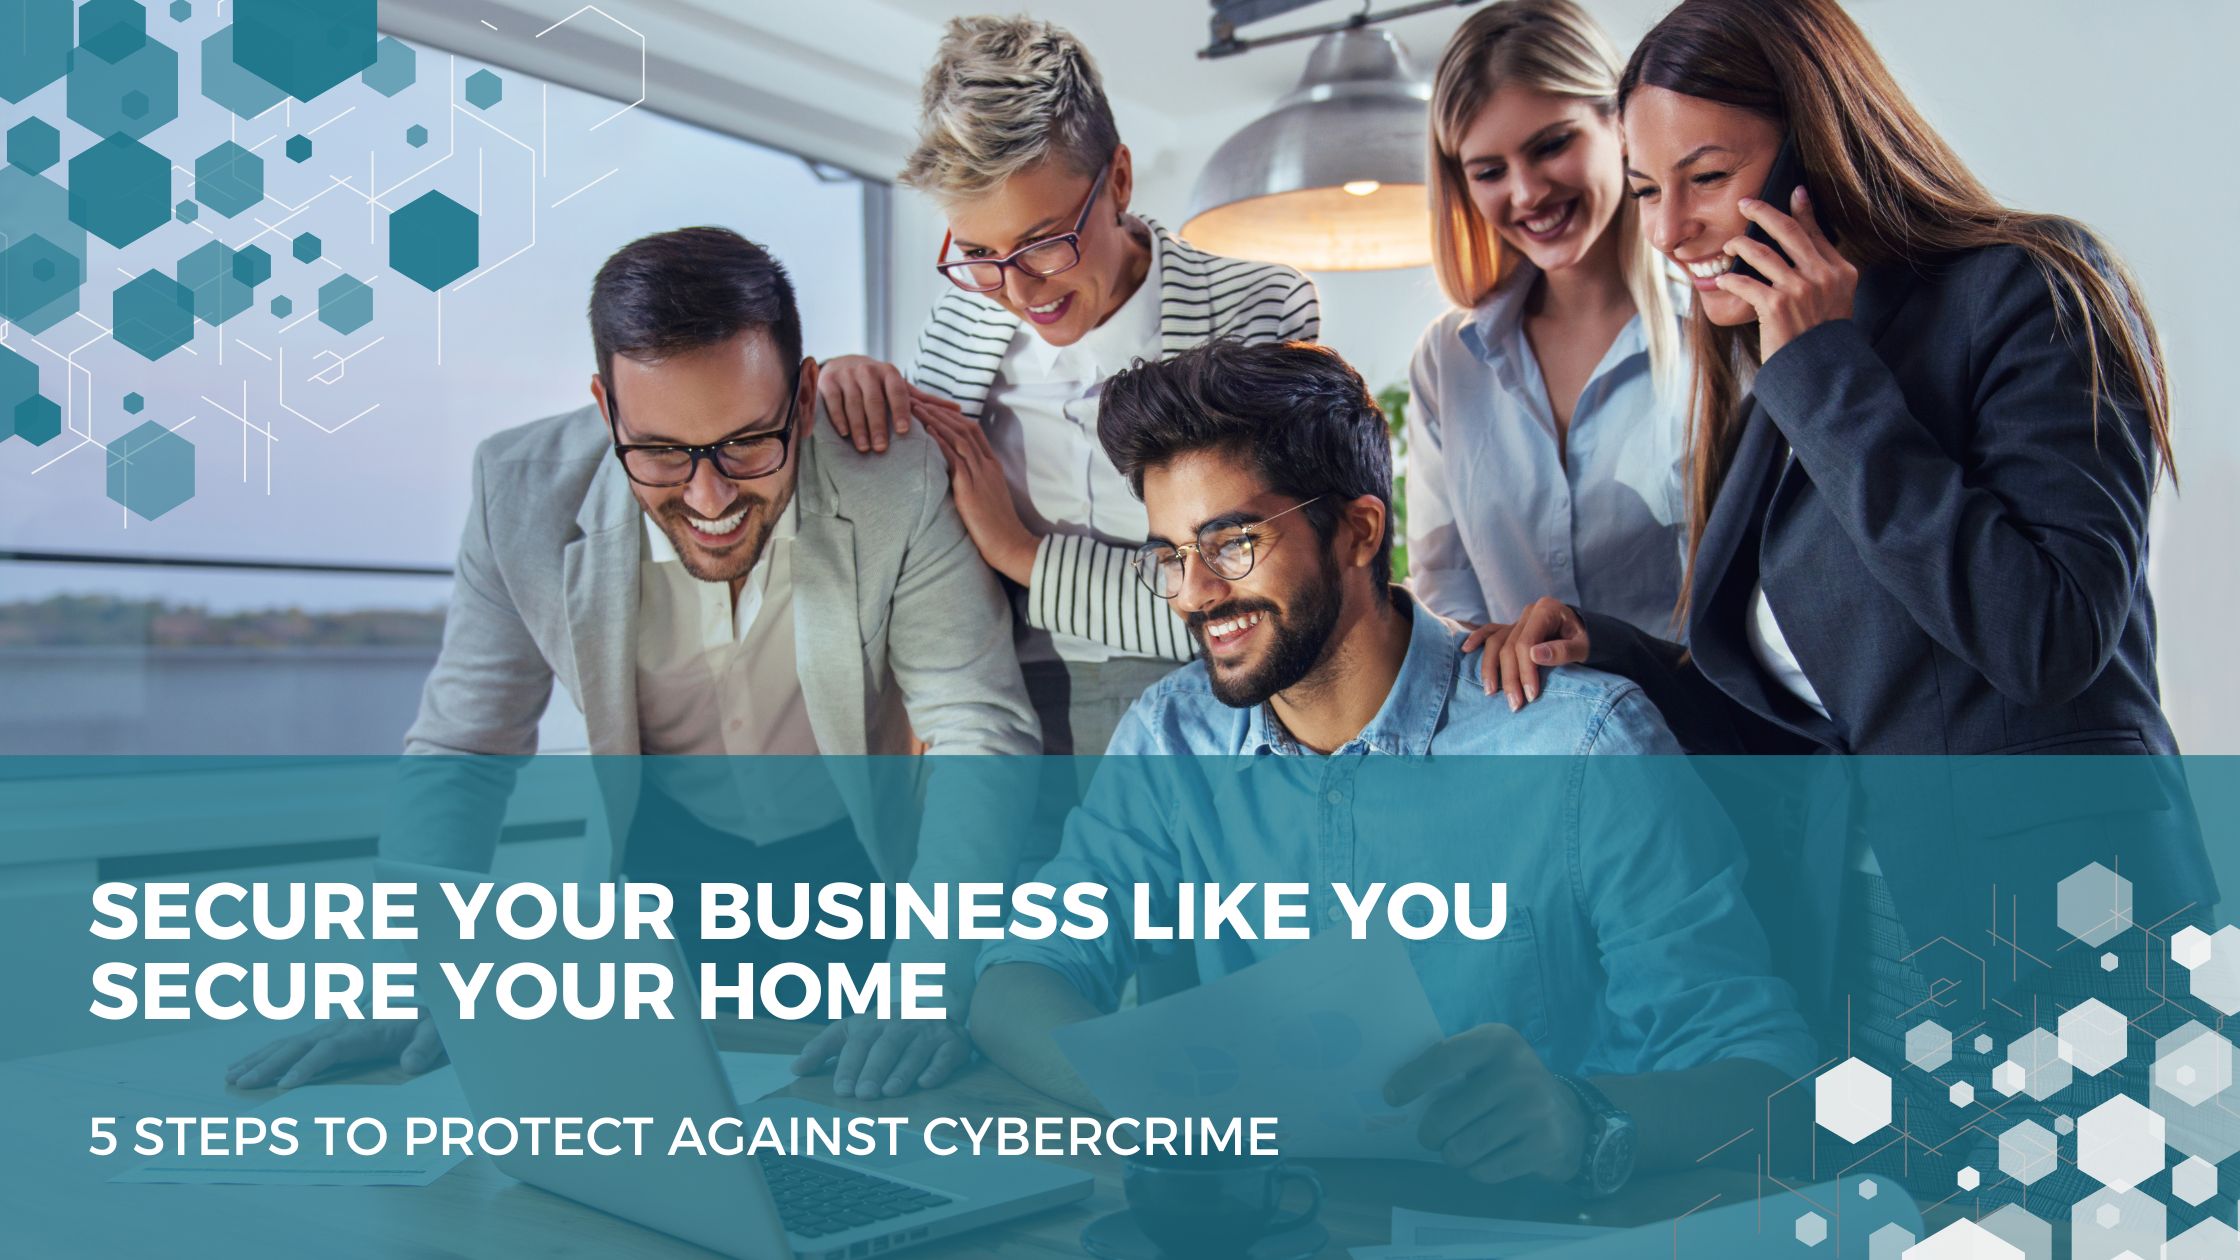 Secure your business like you secure your home